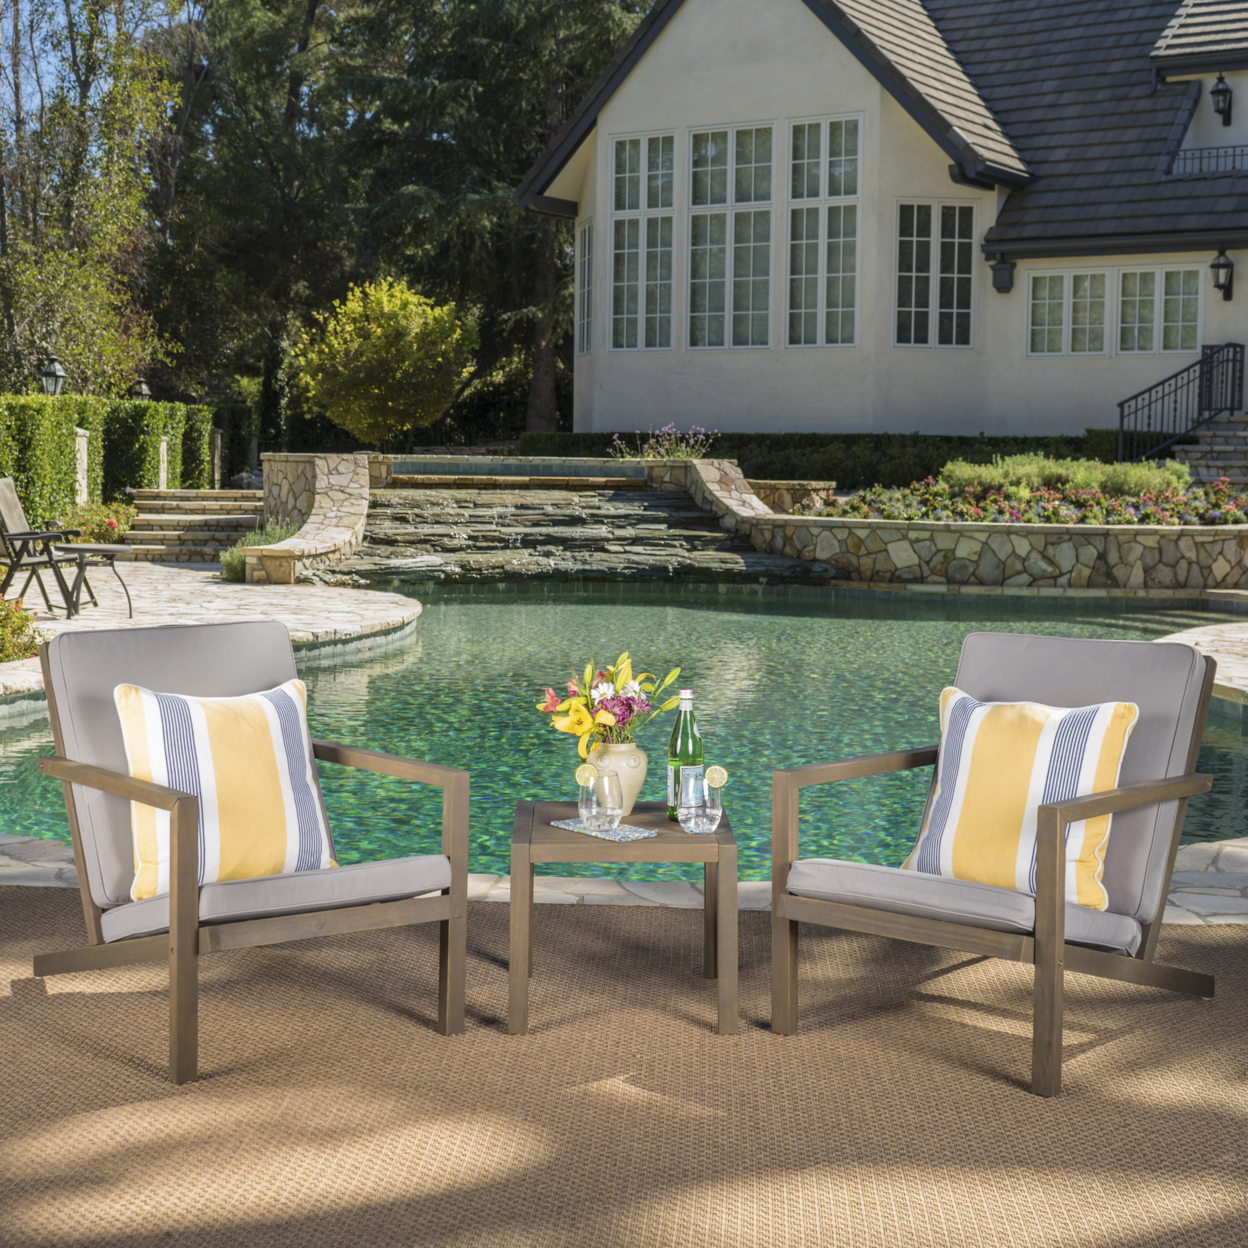 Lester Outdoor 3 Piece Acacia Wood Chat Set With Water Resistant Cushions - Gray